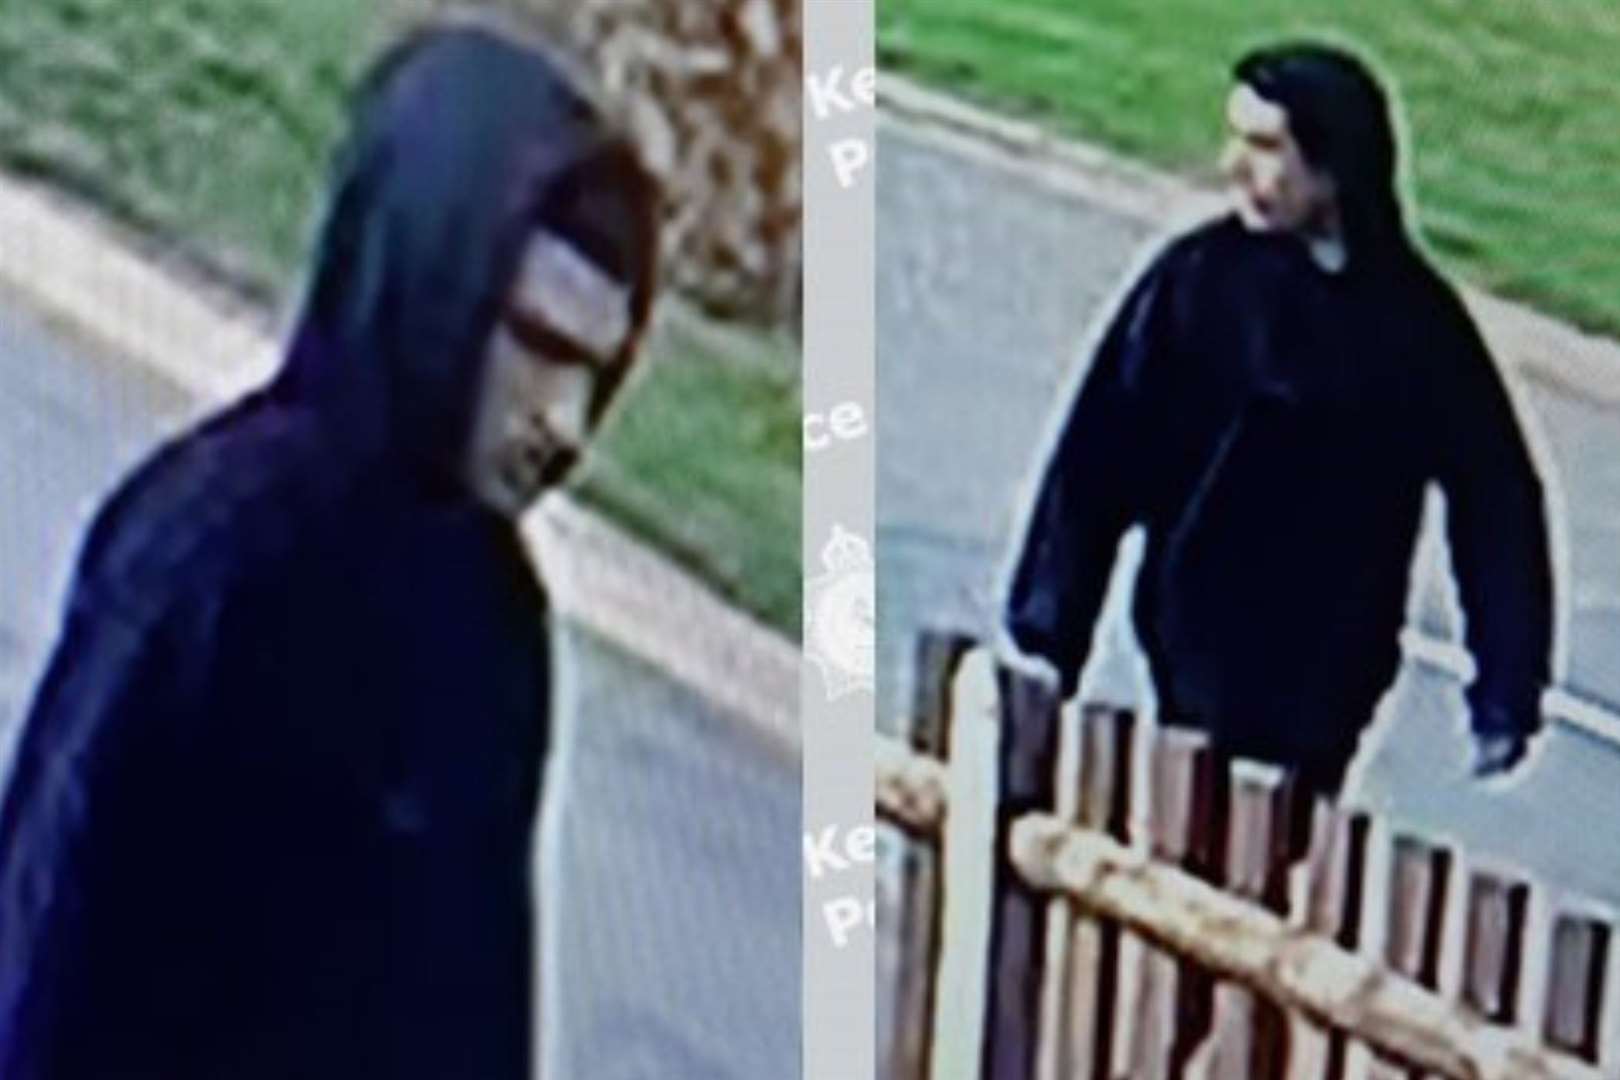 A CCTV image has been released of a man police would like to speak to. Picture: Kent Police